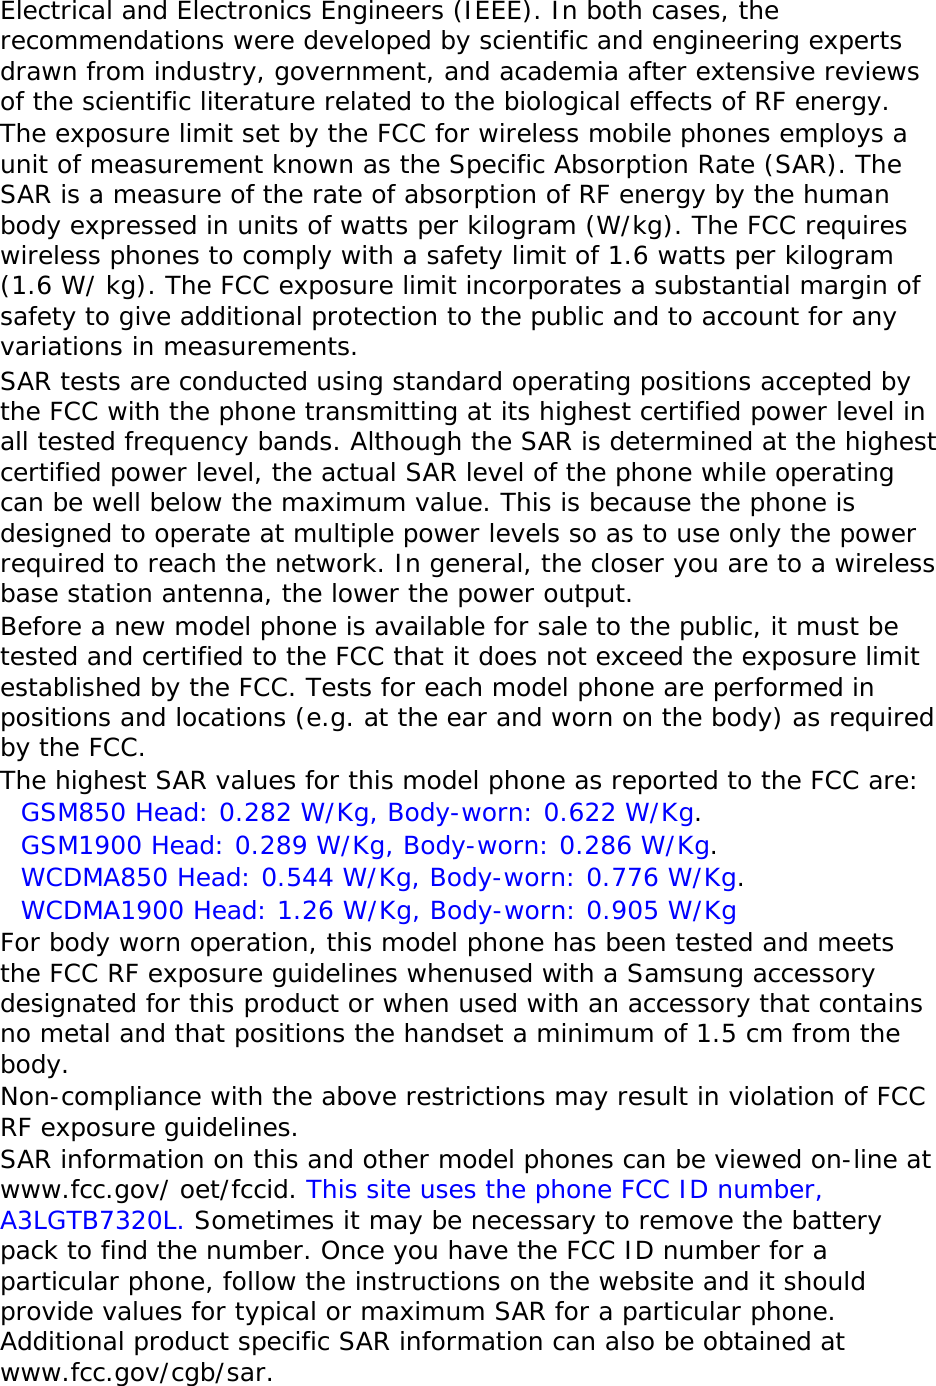 Electrical and Electronics Engineers (IEEE). In both cases, the recommendations were developed by scientific and engineering experts drawn from industry, government, and academia after extensive reviews of the scientific literature related to the biological effects of RF energy. The exposure limit set by the FCC for wireless mobile phones employs a unit of measurement known as the Specific Absorption Rate (SAR). The SAR is a measure of the rate of absorption of RF energy by the human body expressed in units of watts per kilogram (W/kg). The FCC requires wireless phones to comply with a safety limit of 1.6 watts per kilogram (1.6 W/ kg). The FCC exposure limit incorporates a substantial margin of safety to give additional protection to the public and to account for any variations in measurements. SAR tests are conducted using standard operating positions accepted by the FCC with the phone transmitting at its highest certified power level in all tested frequency bands. Although the SAR is determined at the highest certified power level, the actual SAR level of the phone while operating can be well below the maximum value. This is because the phone is designed to operate at multiple power levels so as to use only the power required to reach the network. In general, the closer you are to a wireless base station antenna, the lower the power output. Before a new model phone is available for sale to the public, it must be tested and certified to the FCC that it does not exceed the exposure limit established by the FCC. Tests for each model phone are performed in positions and locations (e.g. at the ear and worn on the body) as required by the FCC.   The highest SAR values for this model phone as reported to the FCC are:  GSM850 Head: 0.282 W/Kg, Body-worn: 0.622 W/Kg. GSM1900 Head: 0.289 W/Kg, Body-worn: 0.286 W/Kg. WCDMA850 Head: 0.544 W/Kg, Body-worn: 0.776 W/Kg. WCDMA1900 Head: 1.26 W/Kg, Body-worn: 0.905 W/Kg For body worn operation, this model phone has been tested and meets the FCC RF exposure guidelines whenused with a Samsung accessory designated for this product or when used with an accessory that contains no metal and that positions the handset a minimum of 1.5 cm from the body.  Non-compliance with the above restrictions may result in violation of FCC RF exposure guidelines. SAR information on this and other model phones can be viewed on-line at www.fcc.gov/ oet/fccid. This site uses the phone FCC ID number, A3LGTB7320L. Sometimes it may be necessary to remove the battery pack to find the number. Once you have the FCC ID number for a particular phone, follow the instructions on the website and it should provide values for typical or maximum SAR for a particular phone. Additional product specific SAR information can also be obtained at www.fcc.gov/cgb/sar. 